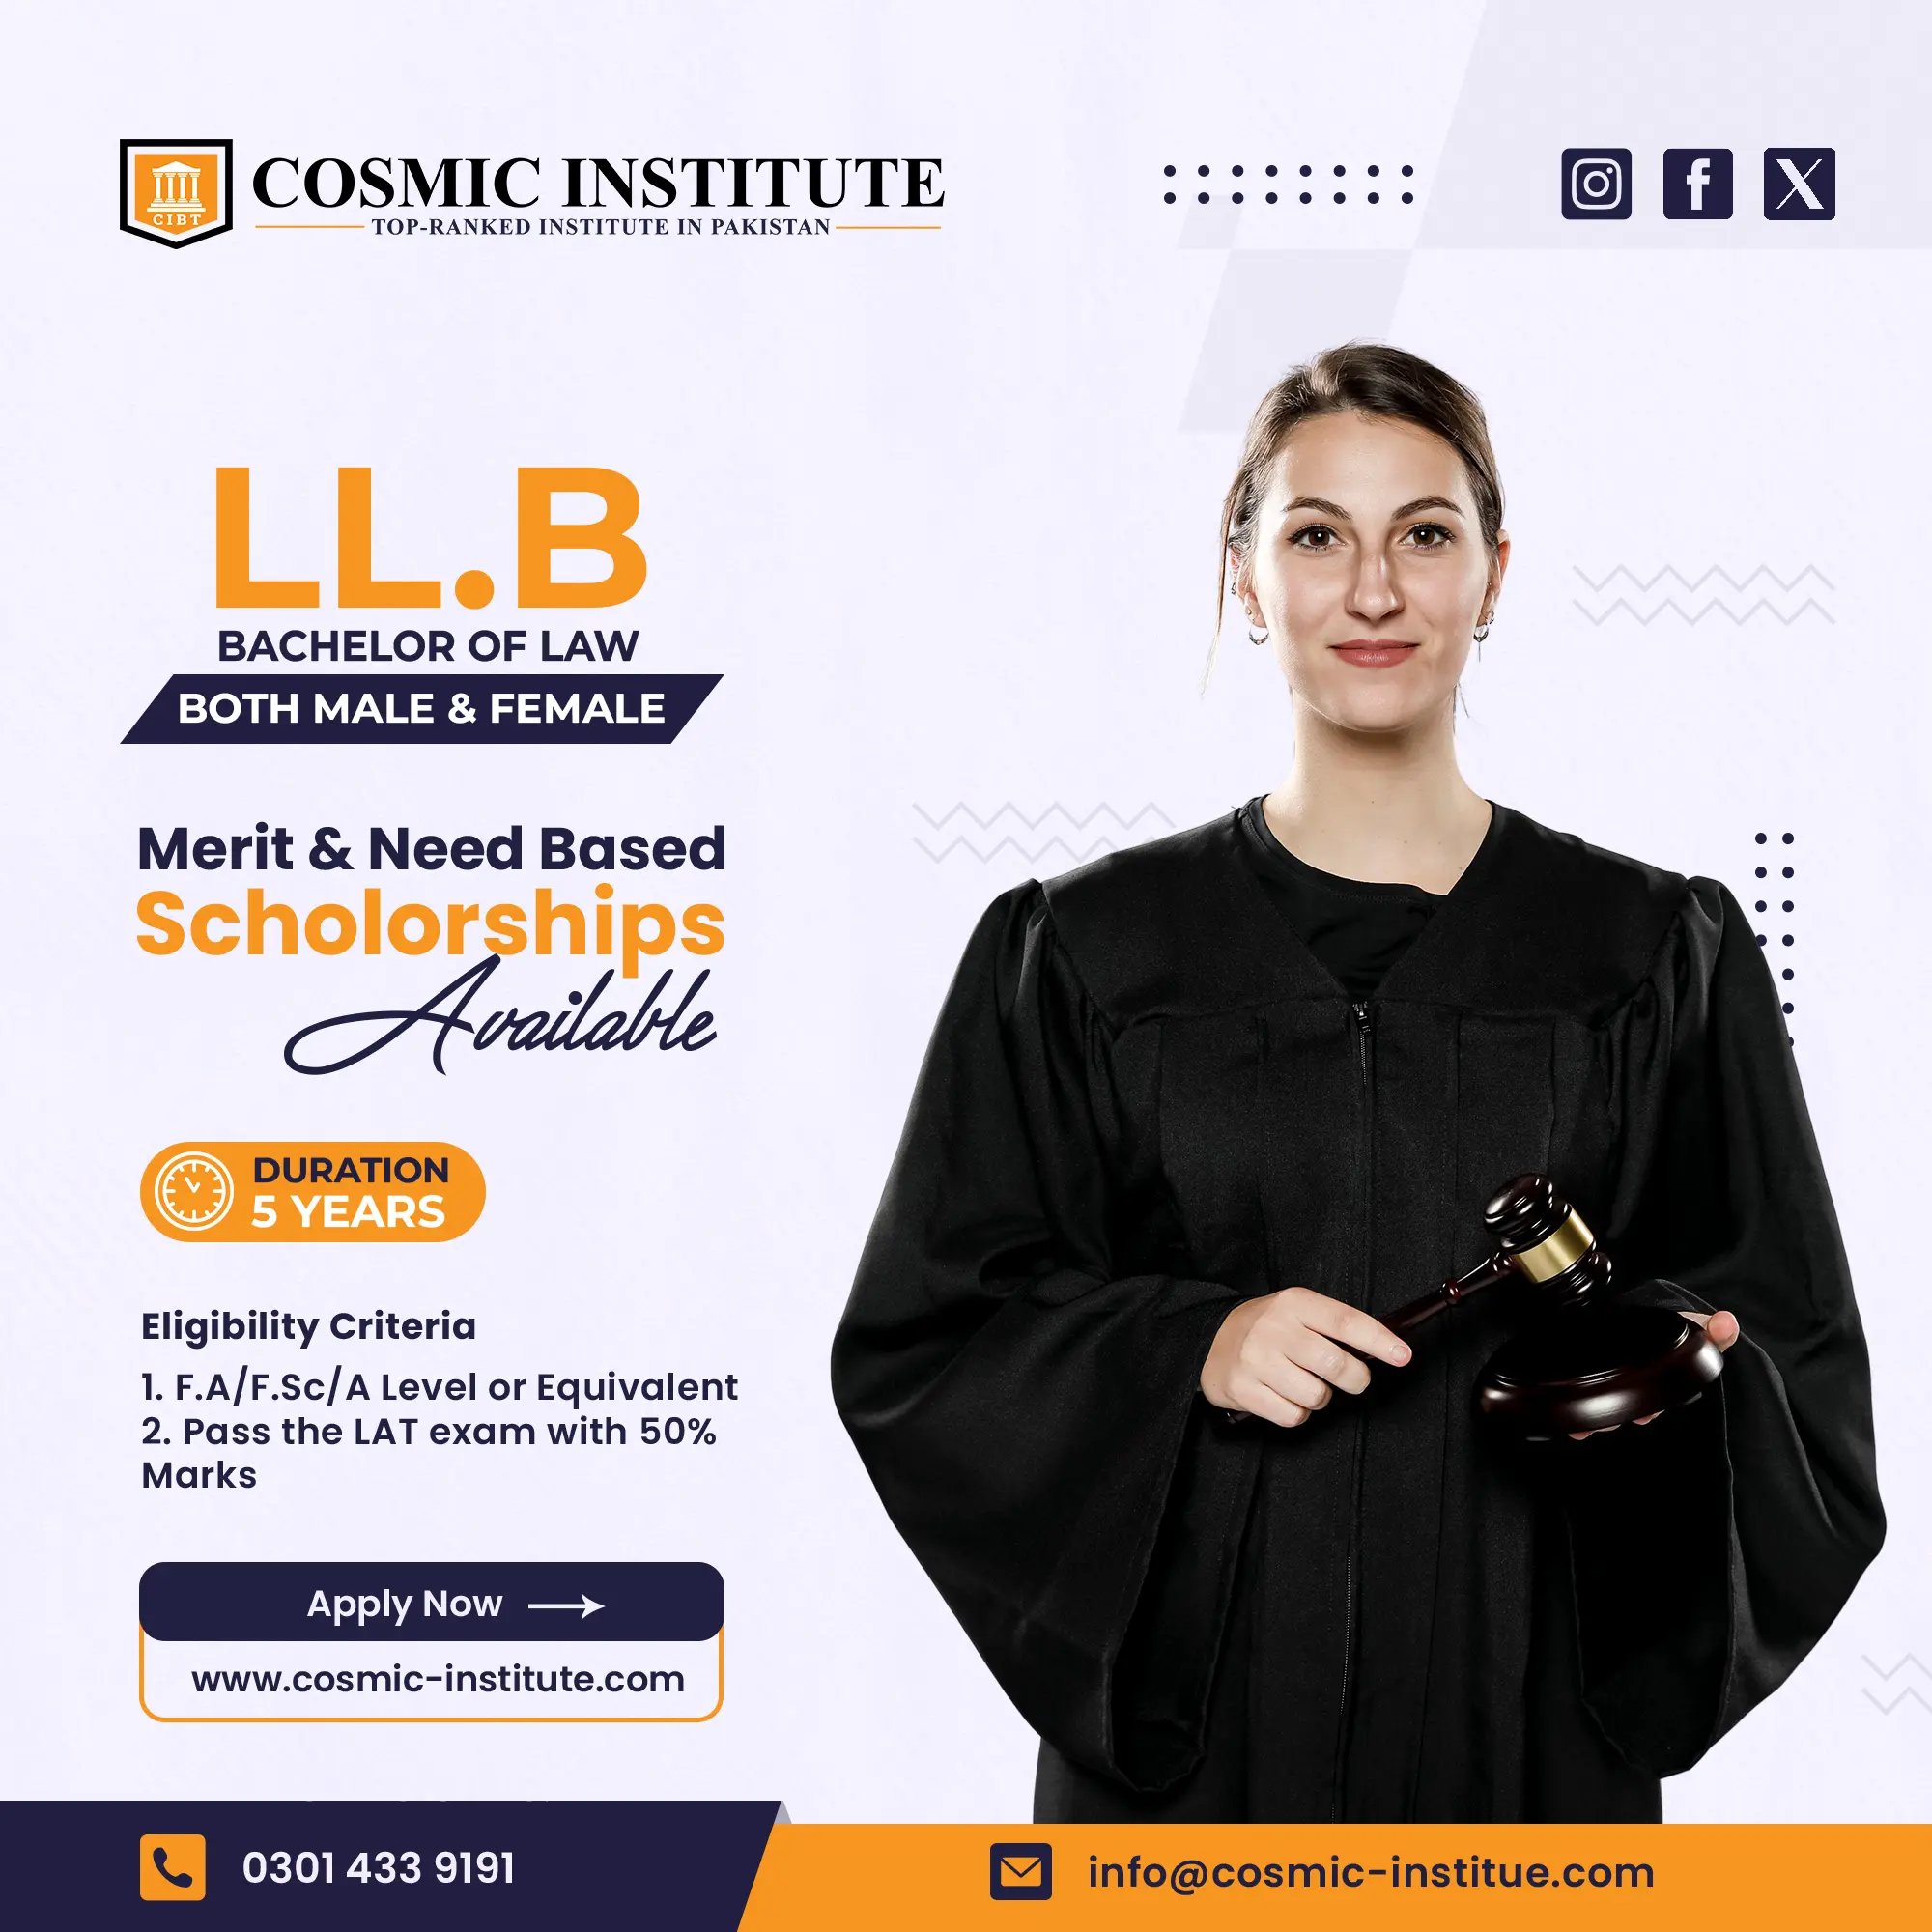 LL.B 5 Year Degree feature image